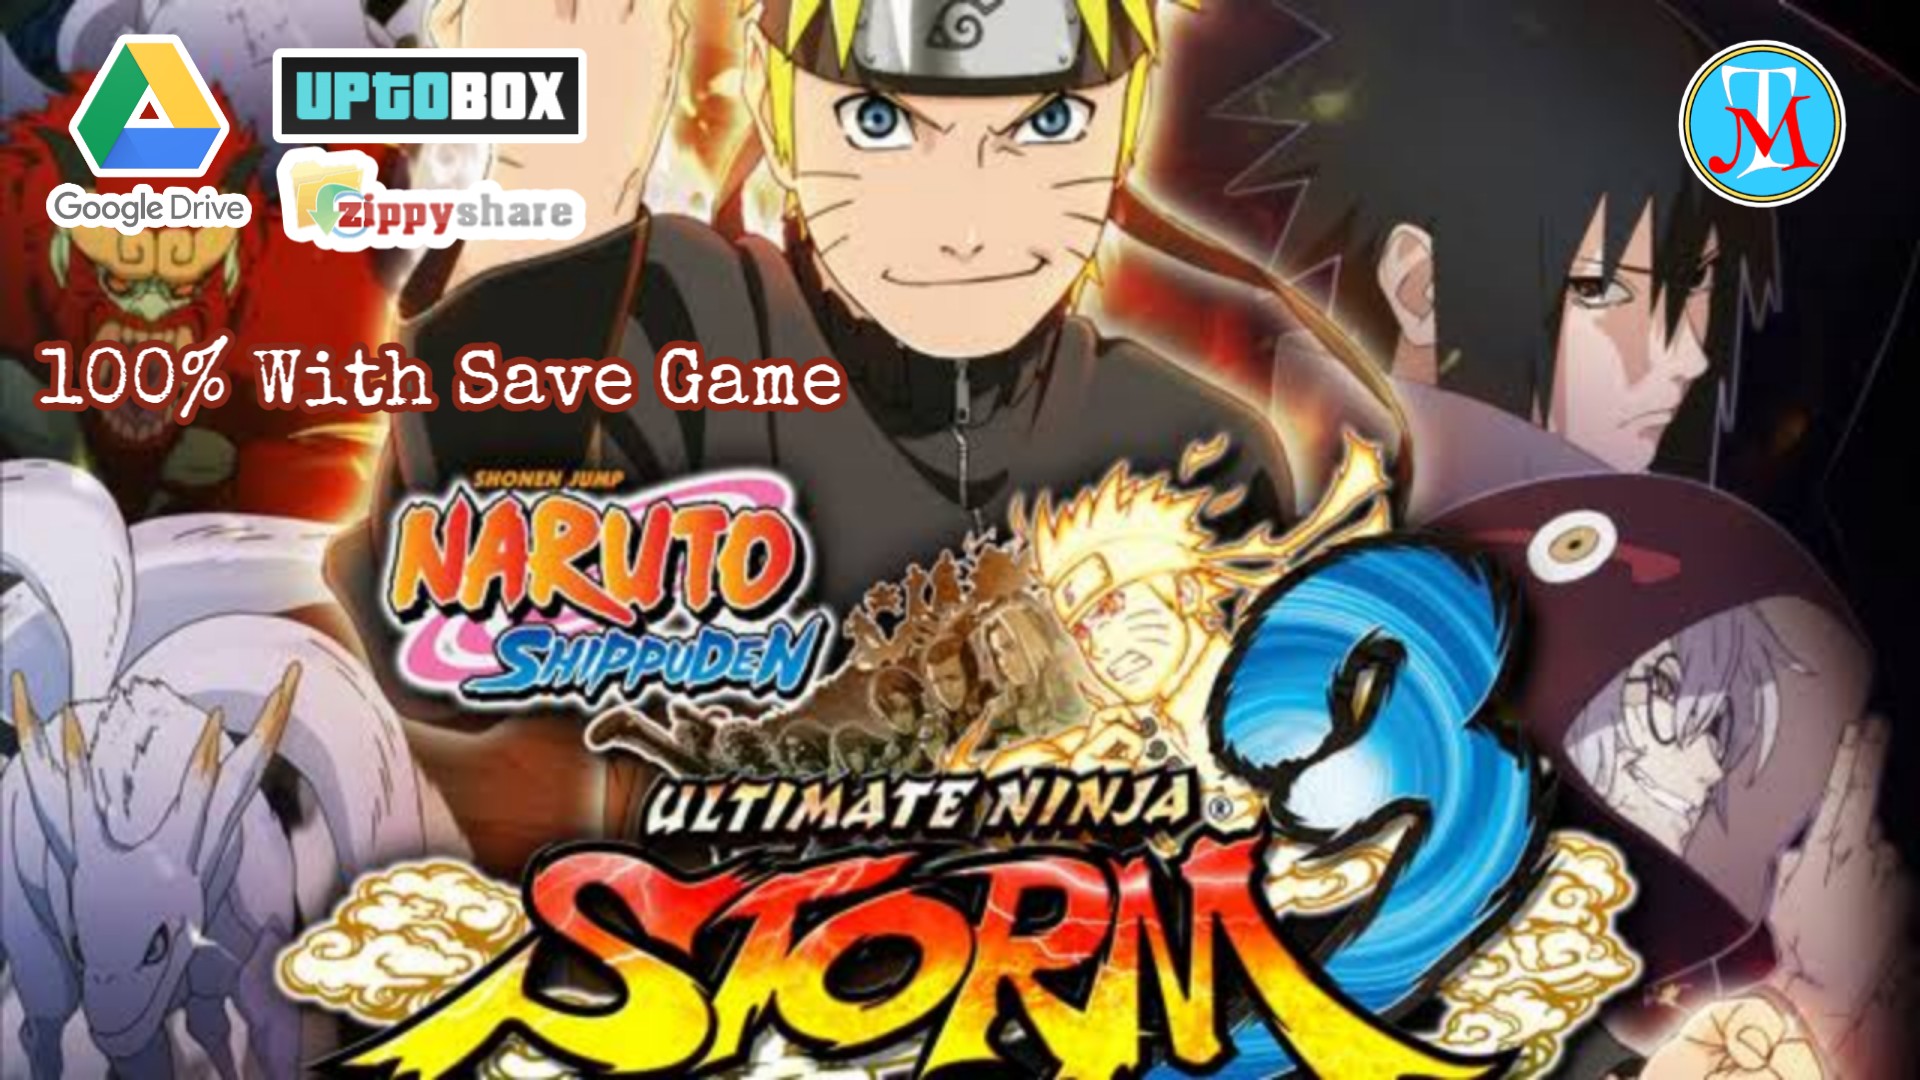 Posted On 4 April 2019 By Miltech99 - Naruto Shippuden Ultimate Ninja Storm 3 , HD Wallpaper & Backgrounds